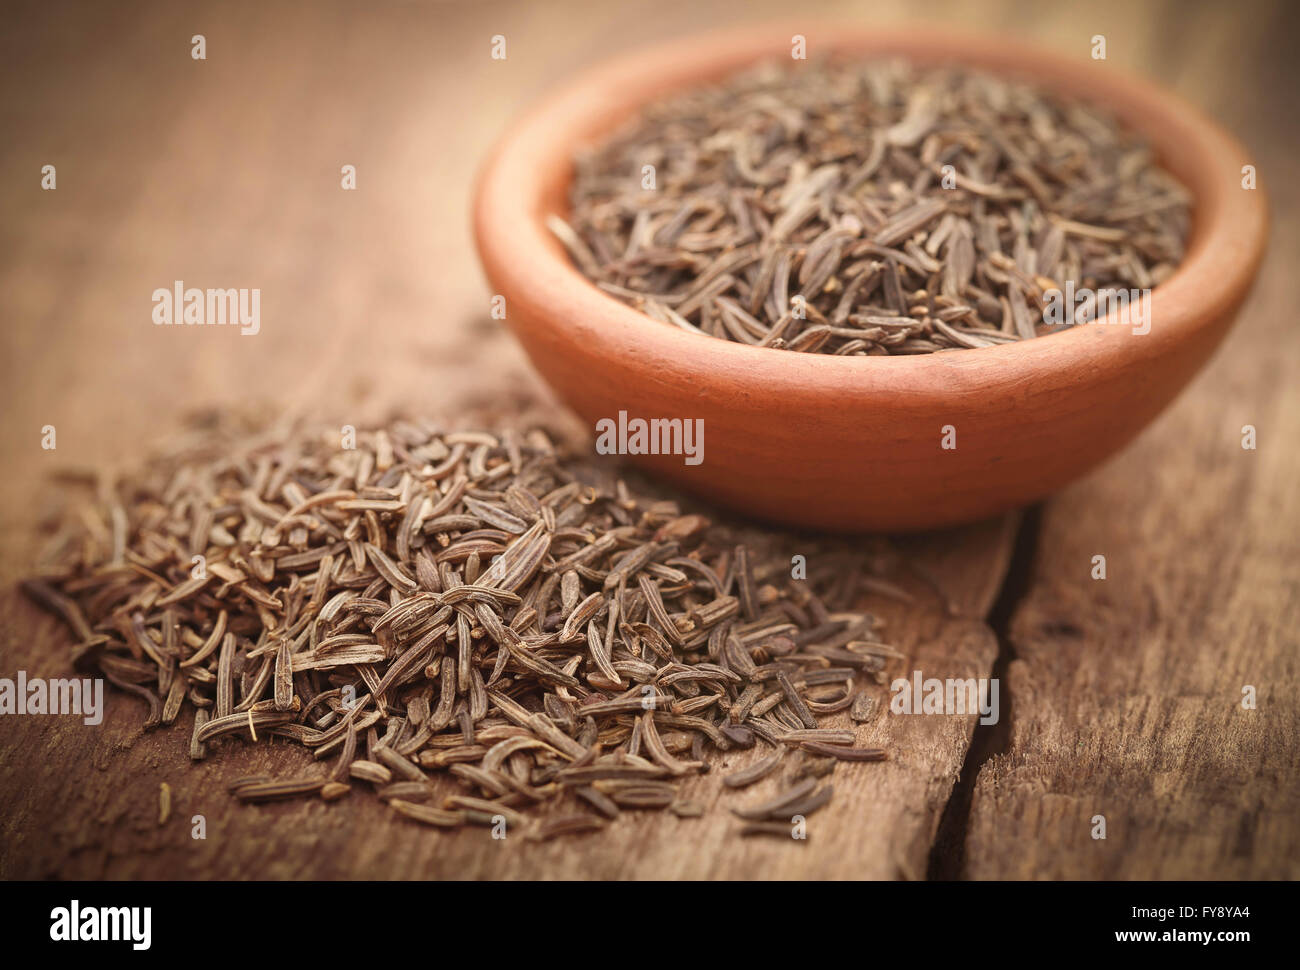 Caraway seeds in a pottery on wooden surface Stock Photo